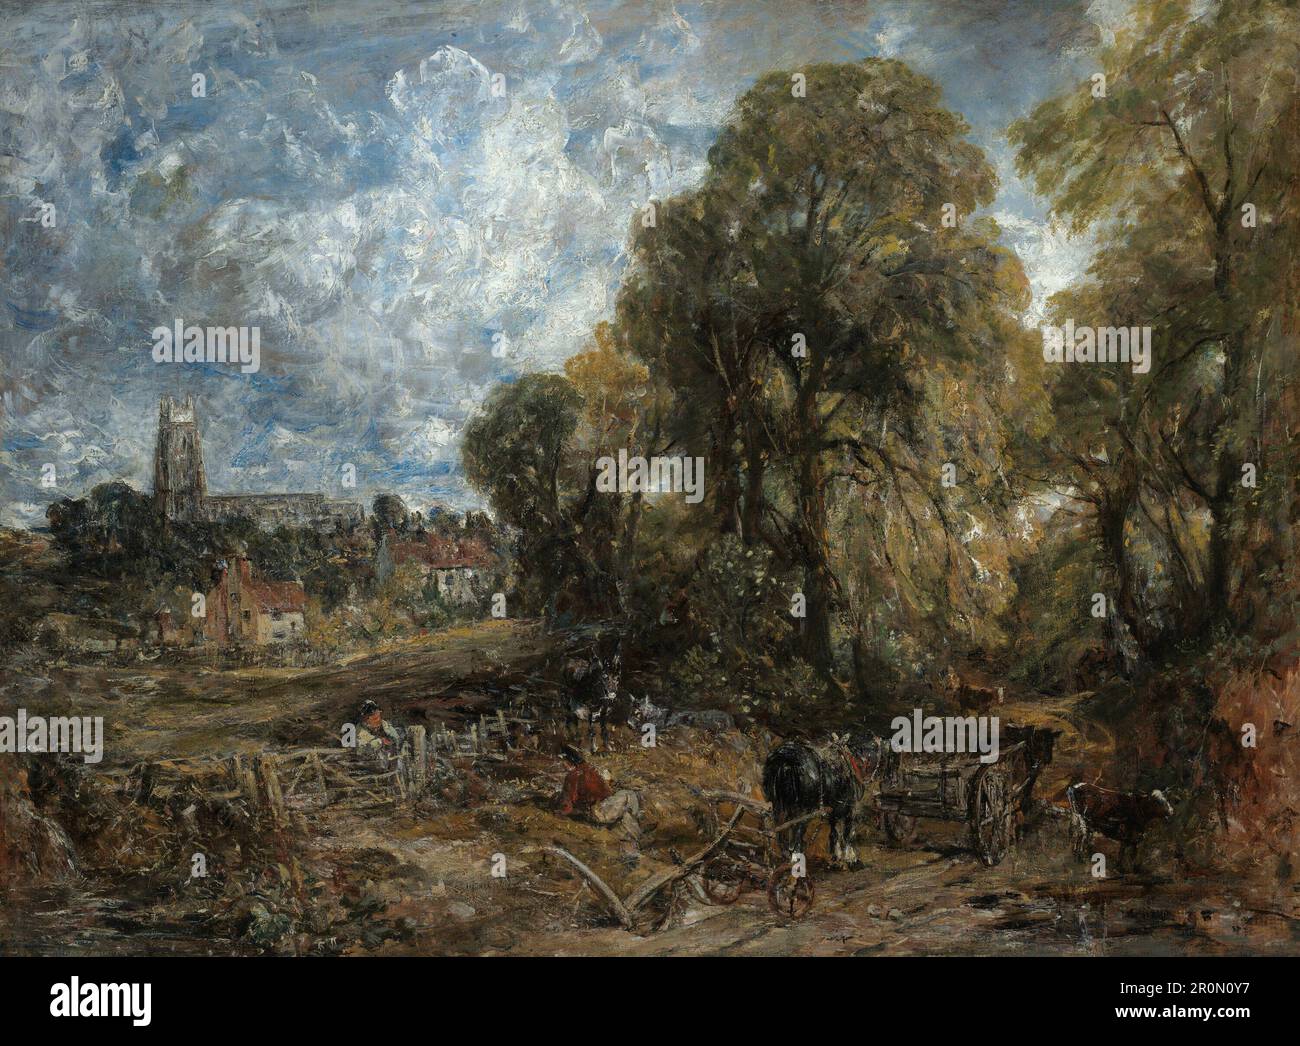 Stoke-by-Nayland Date: 1836 artiste: John Constable English, 1776-1837 Banque D'Images